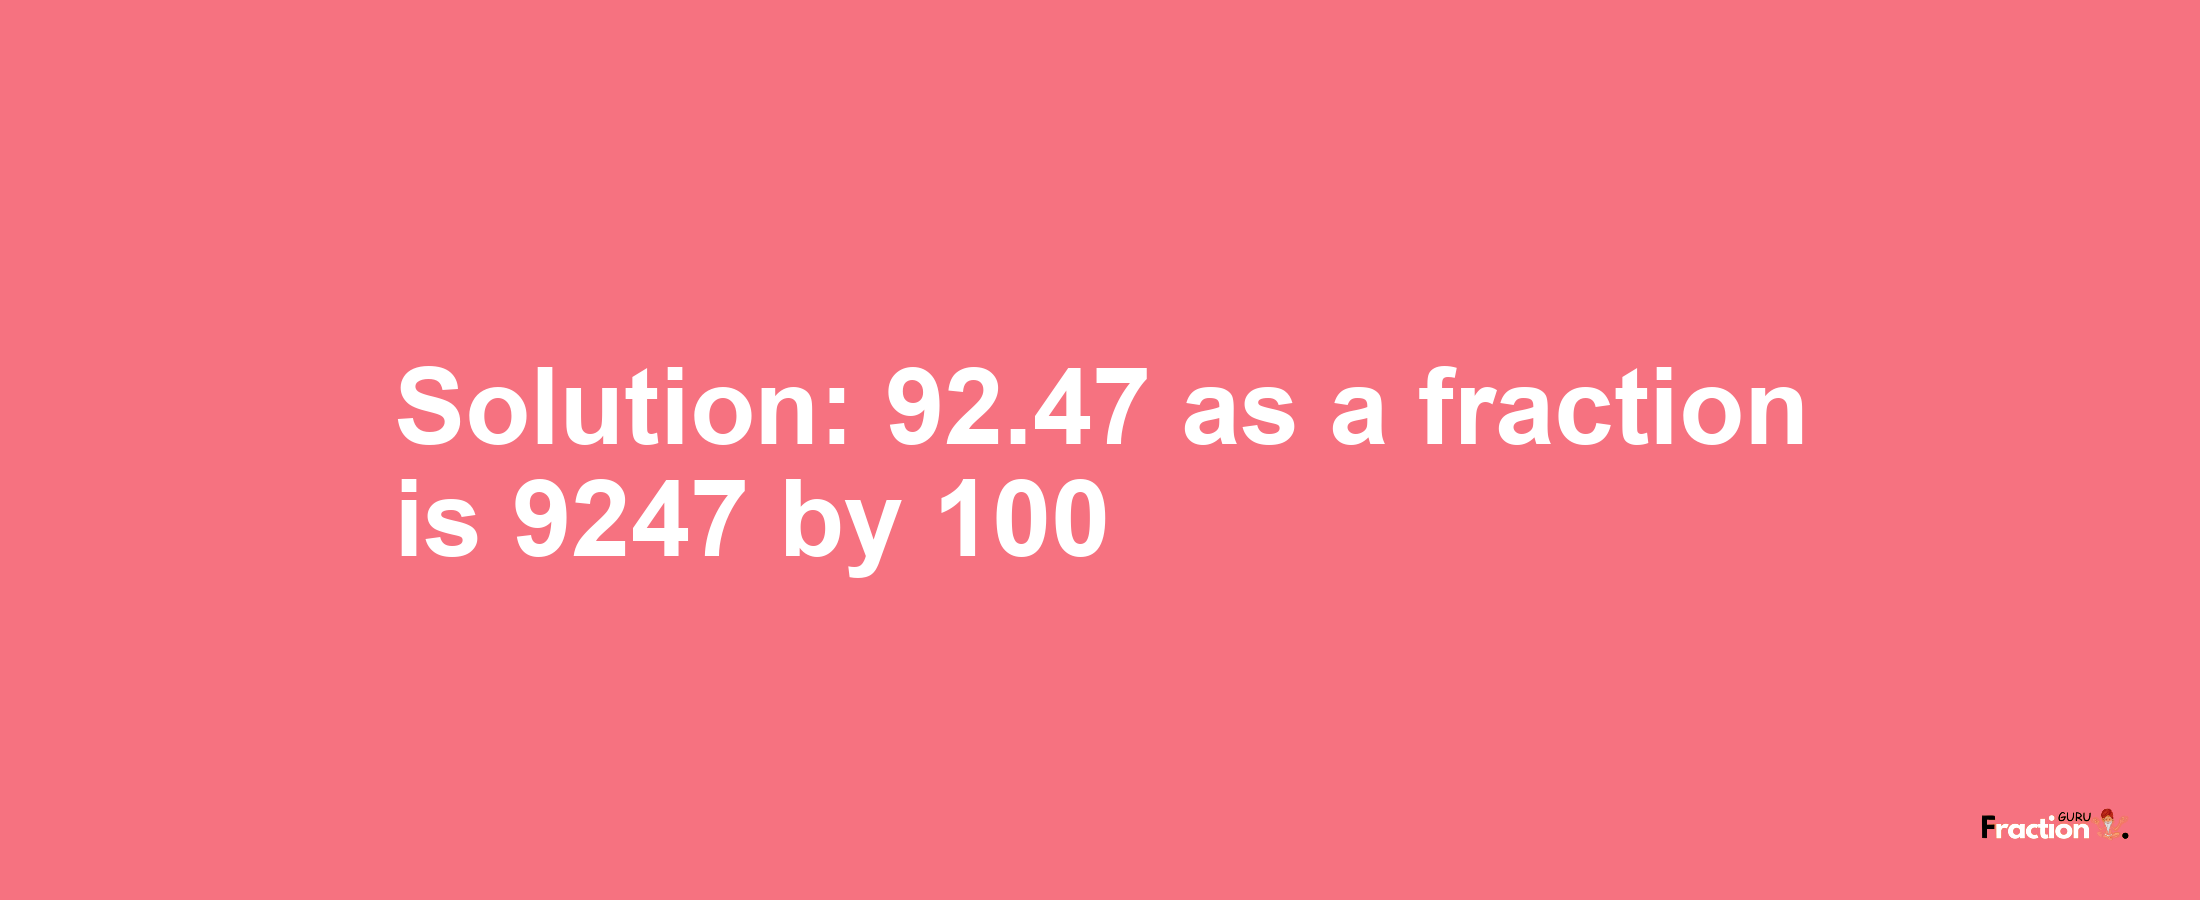 Solution:92.47 as a fraction is 9247/100